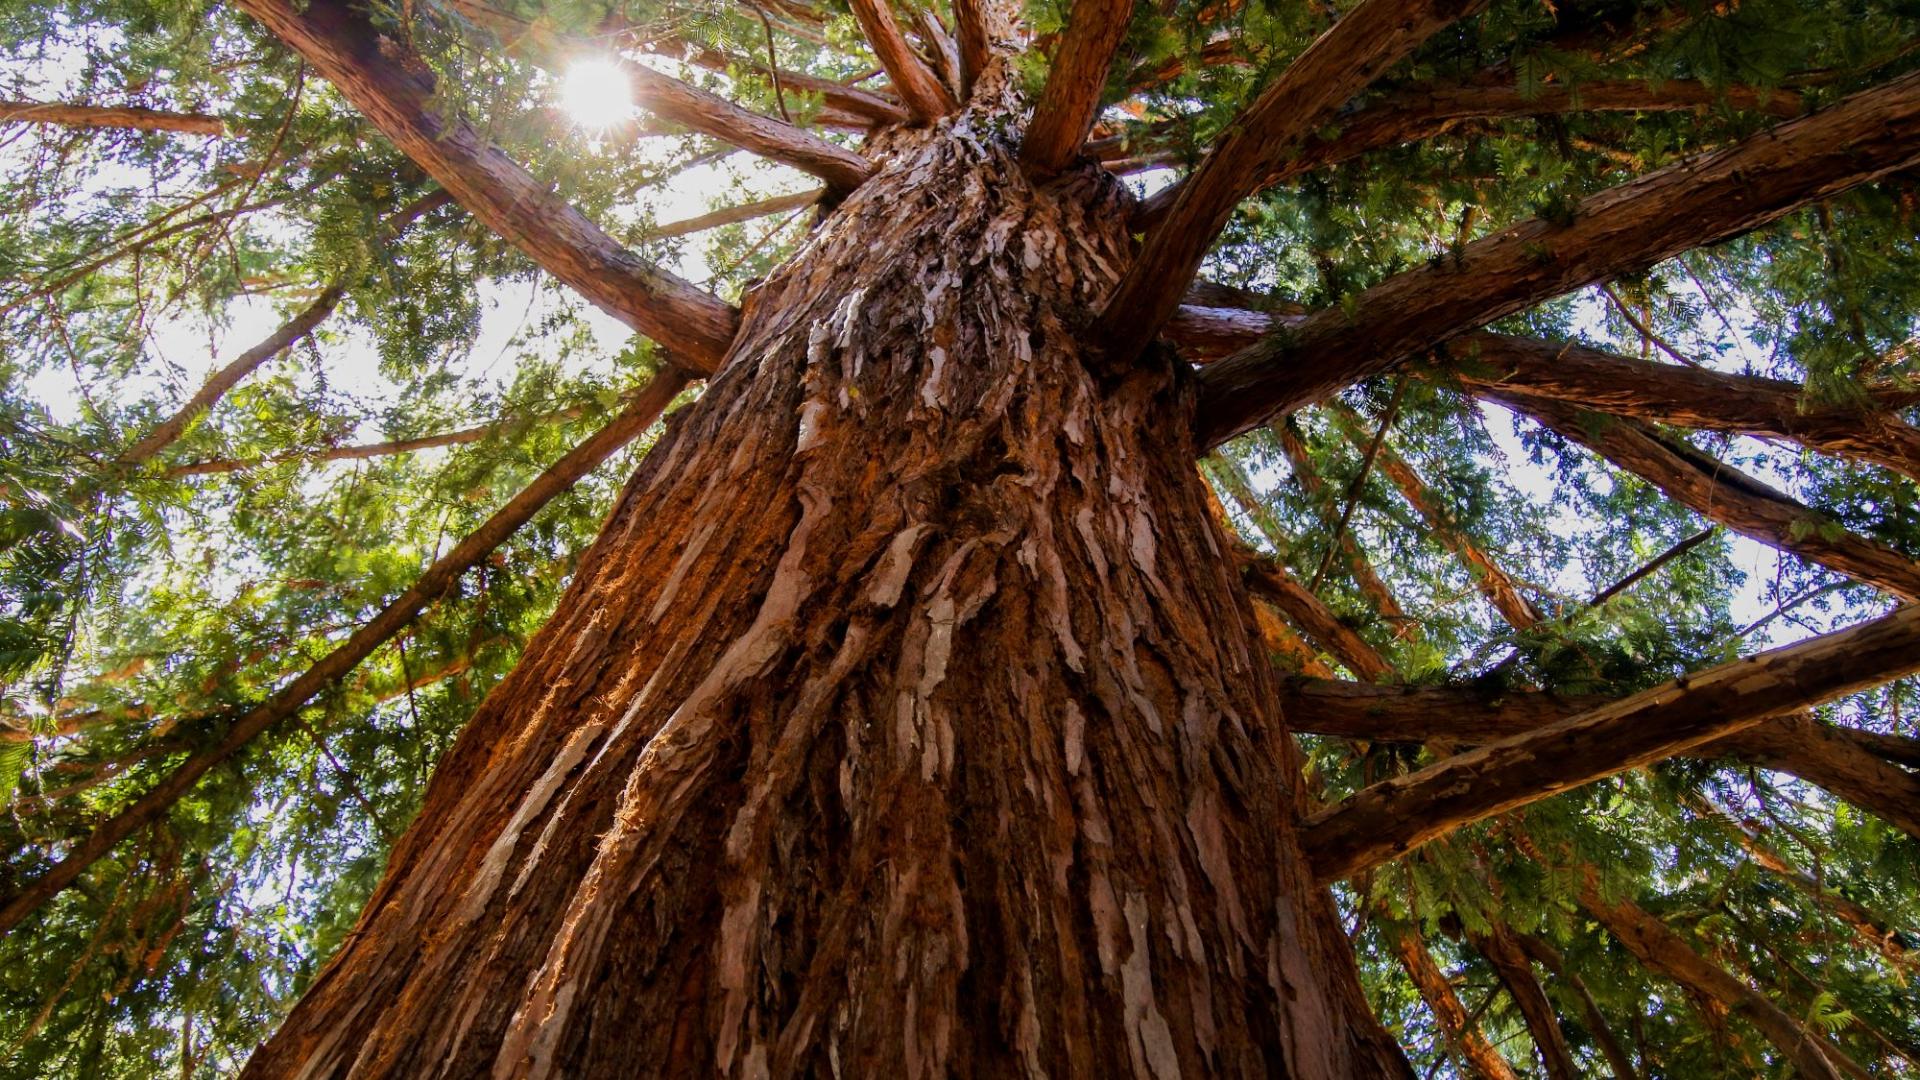 A Giant Sequioa tree is seen from below, looking up to its tall trunk and branches.